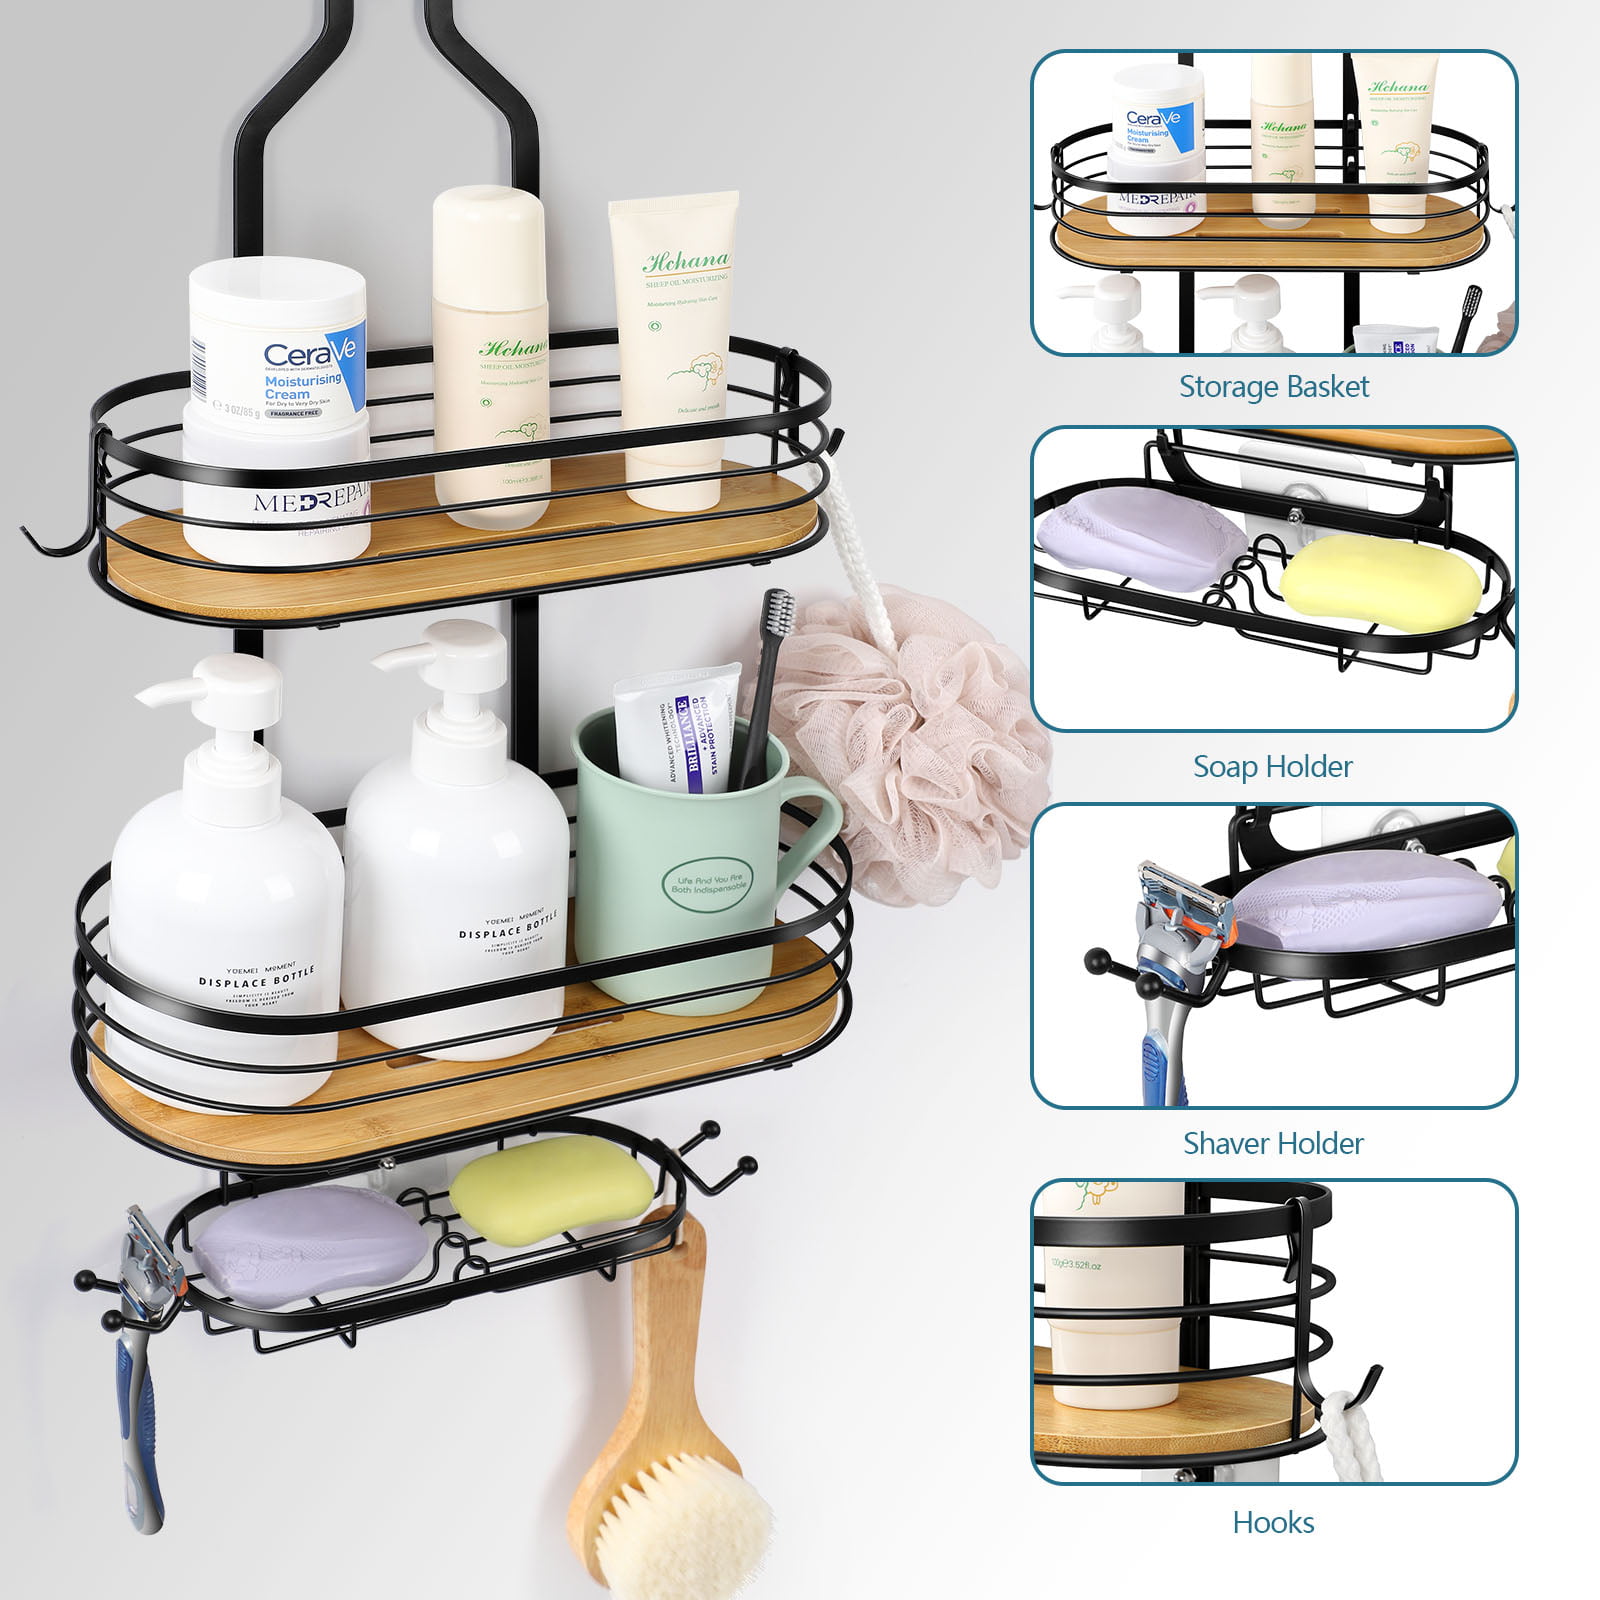 Home Basics Bamboo Shower Caddy Shelf with 2 Suction Cups, Natural